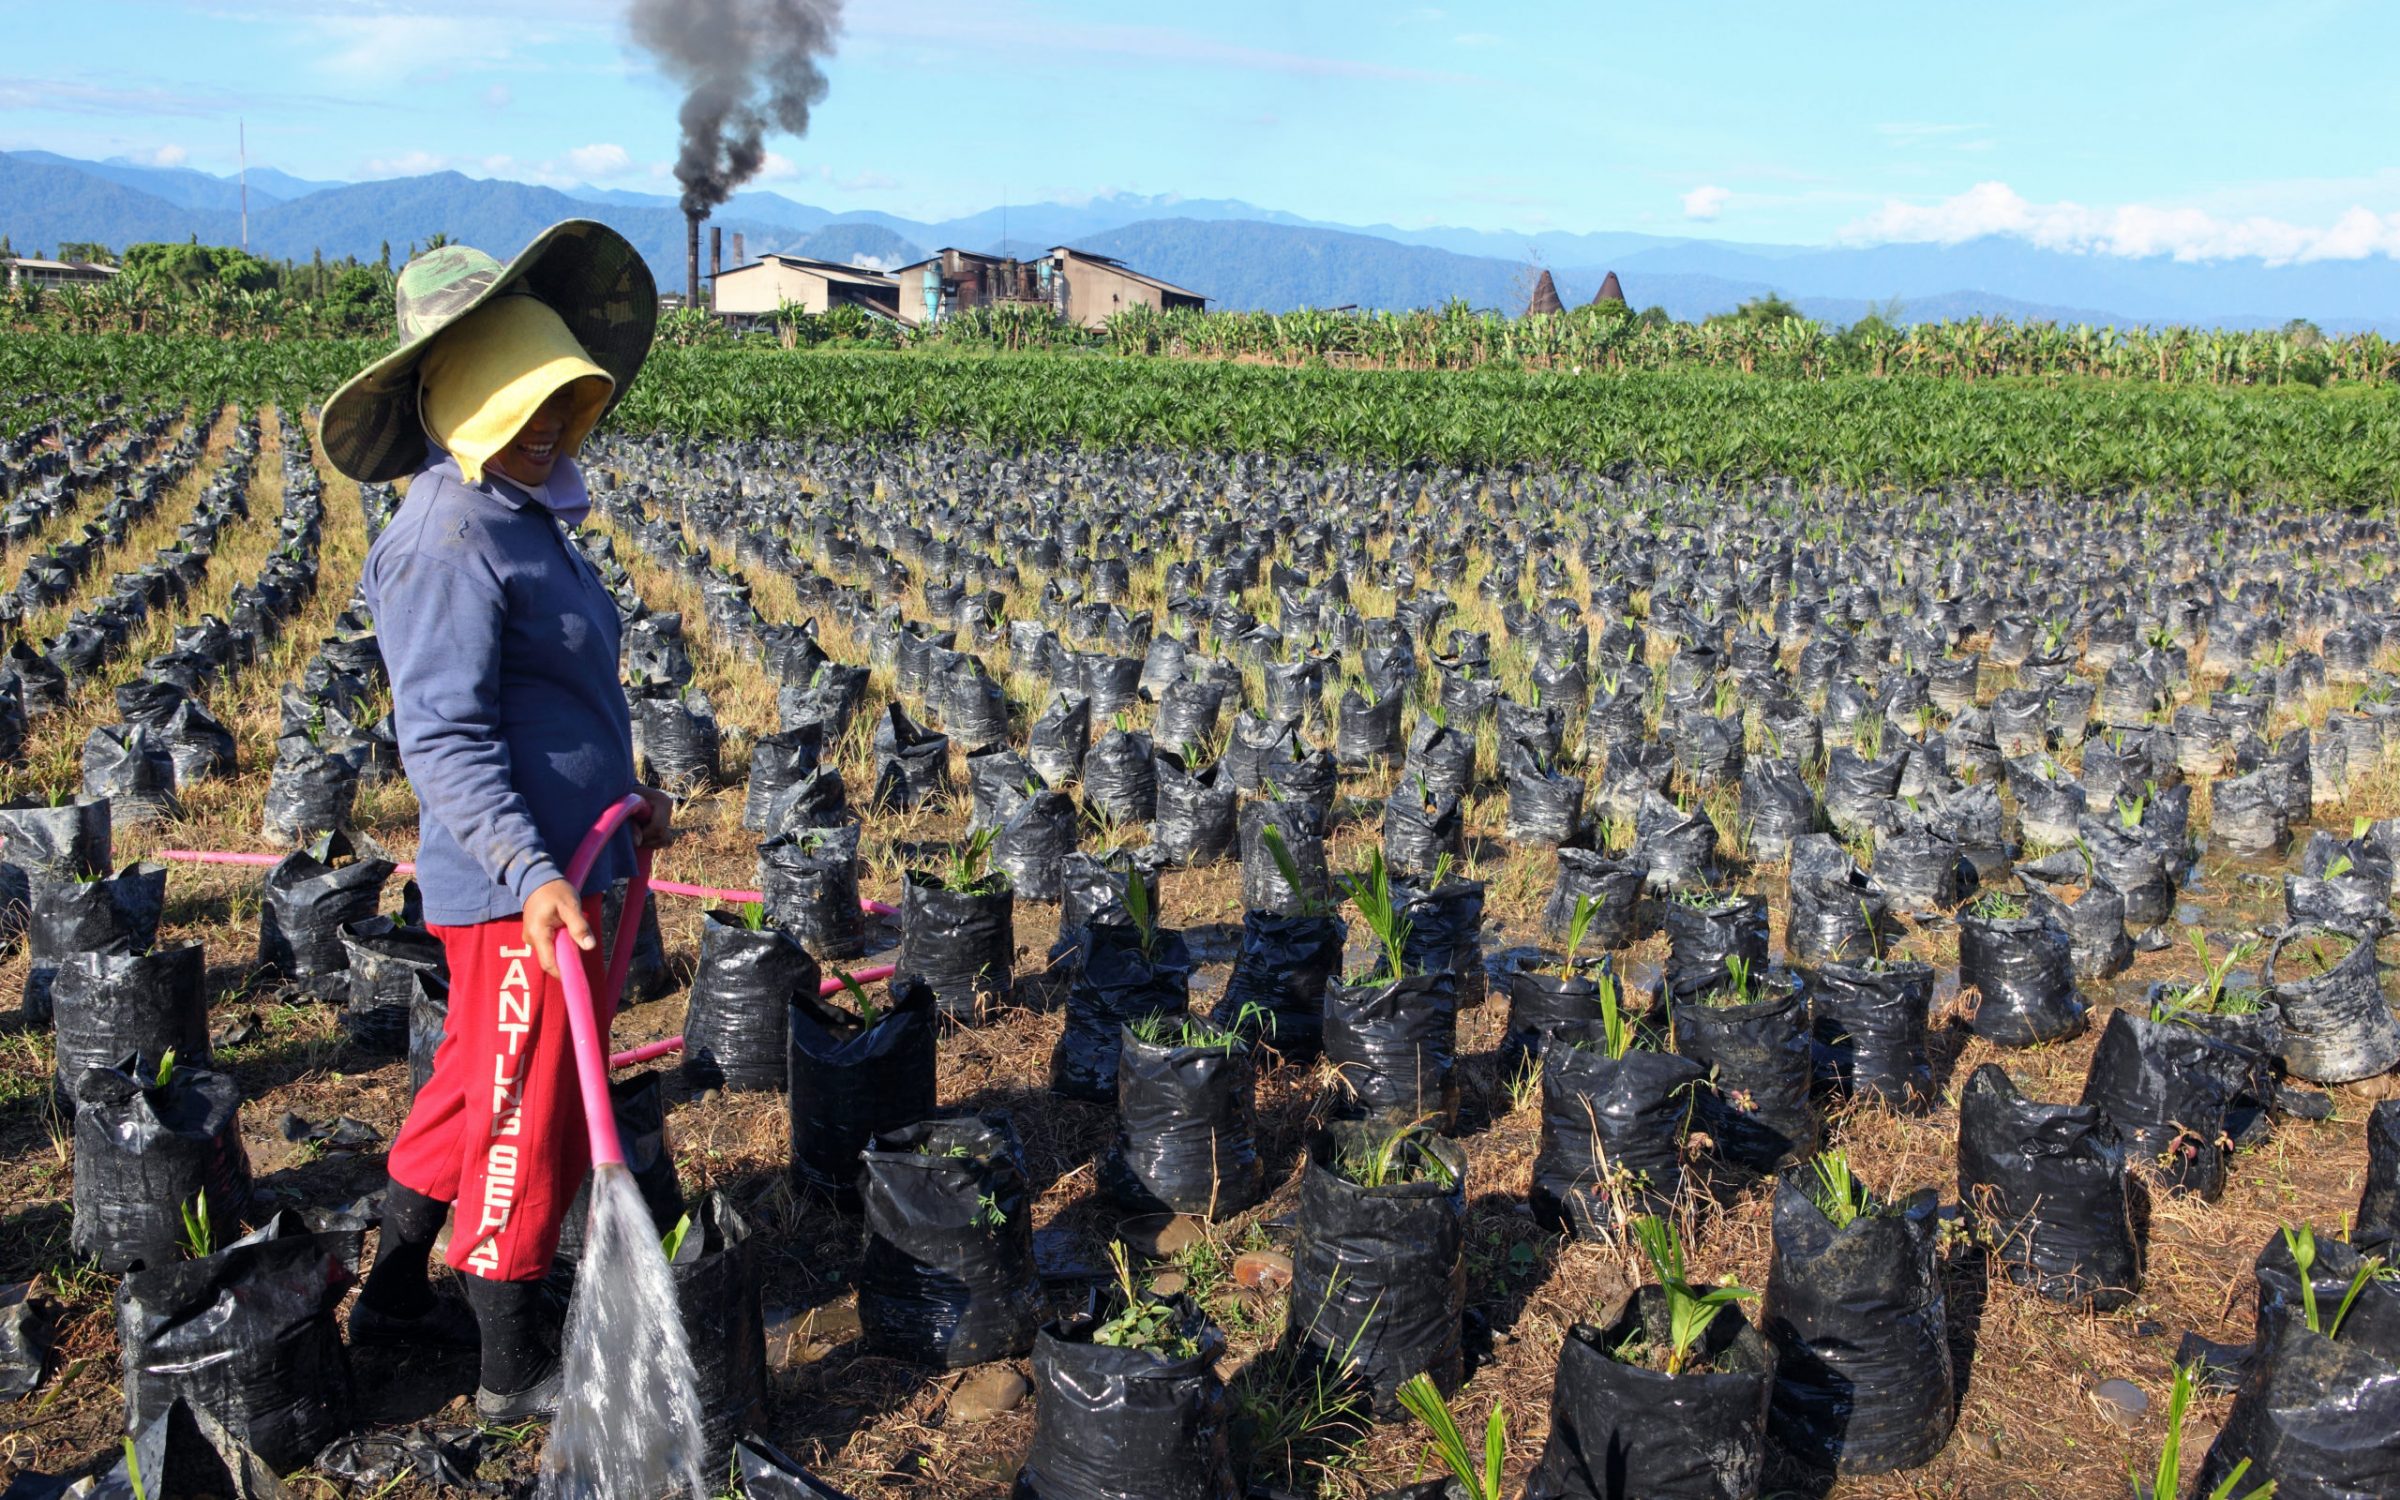 A woman waters young palm oil plants at a nursery with palm oil refinery in the background. Binjai, North Sumatra, Indonesia